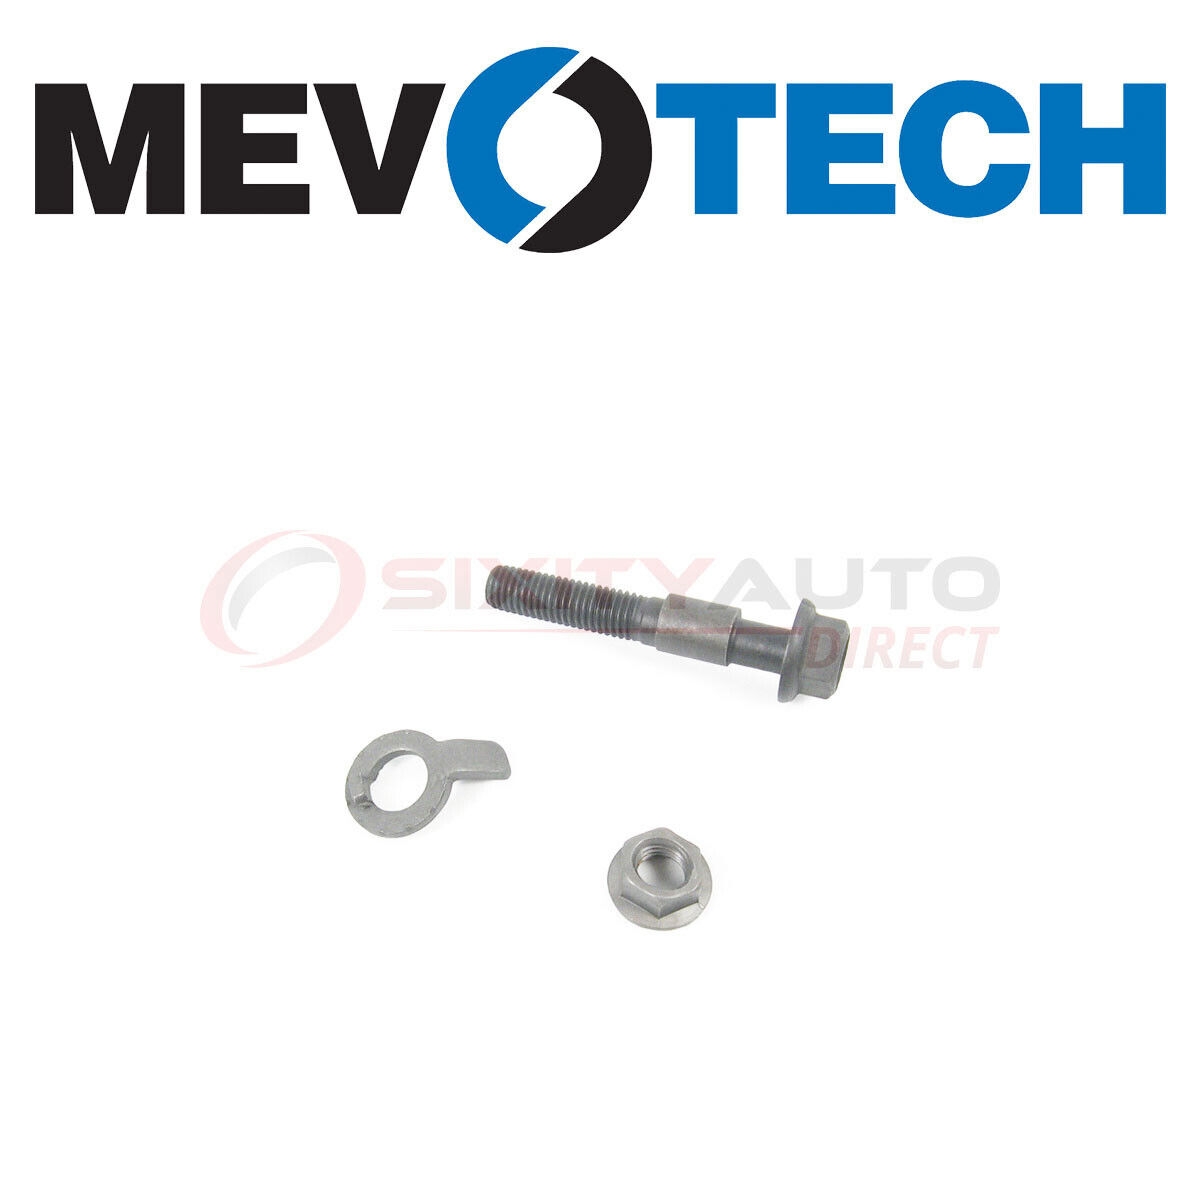 Mevotech Alignment Camber Kit for 1993 Saturn SW2 1.9L L4 - Wheels Tires lc